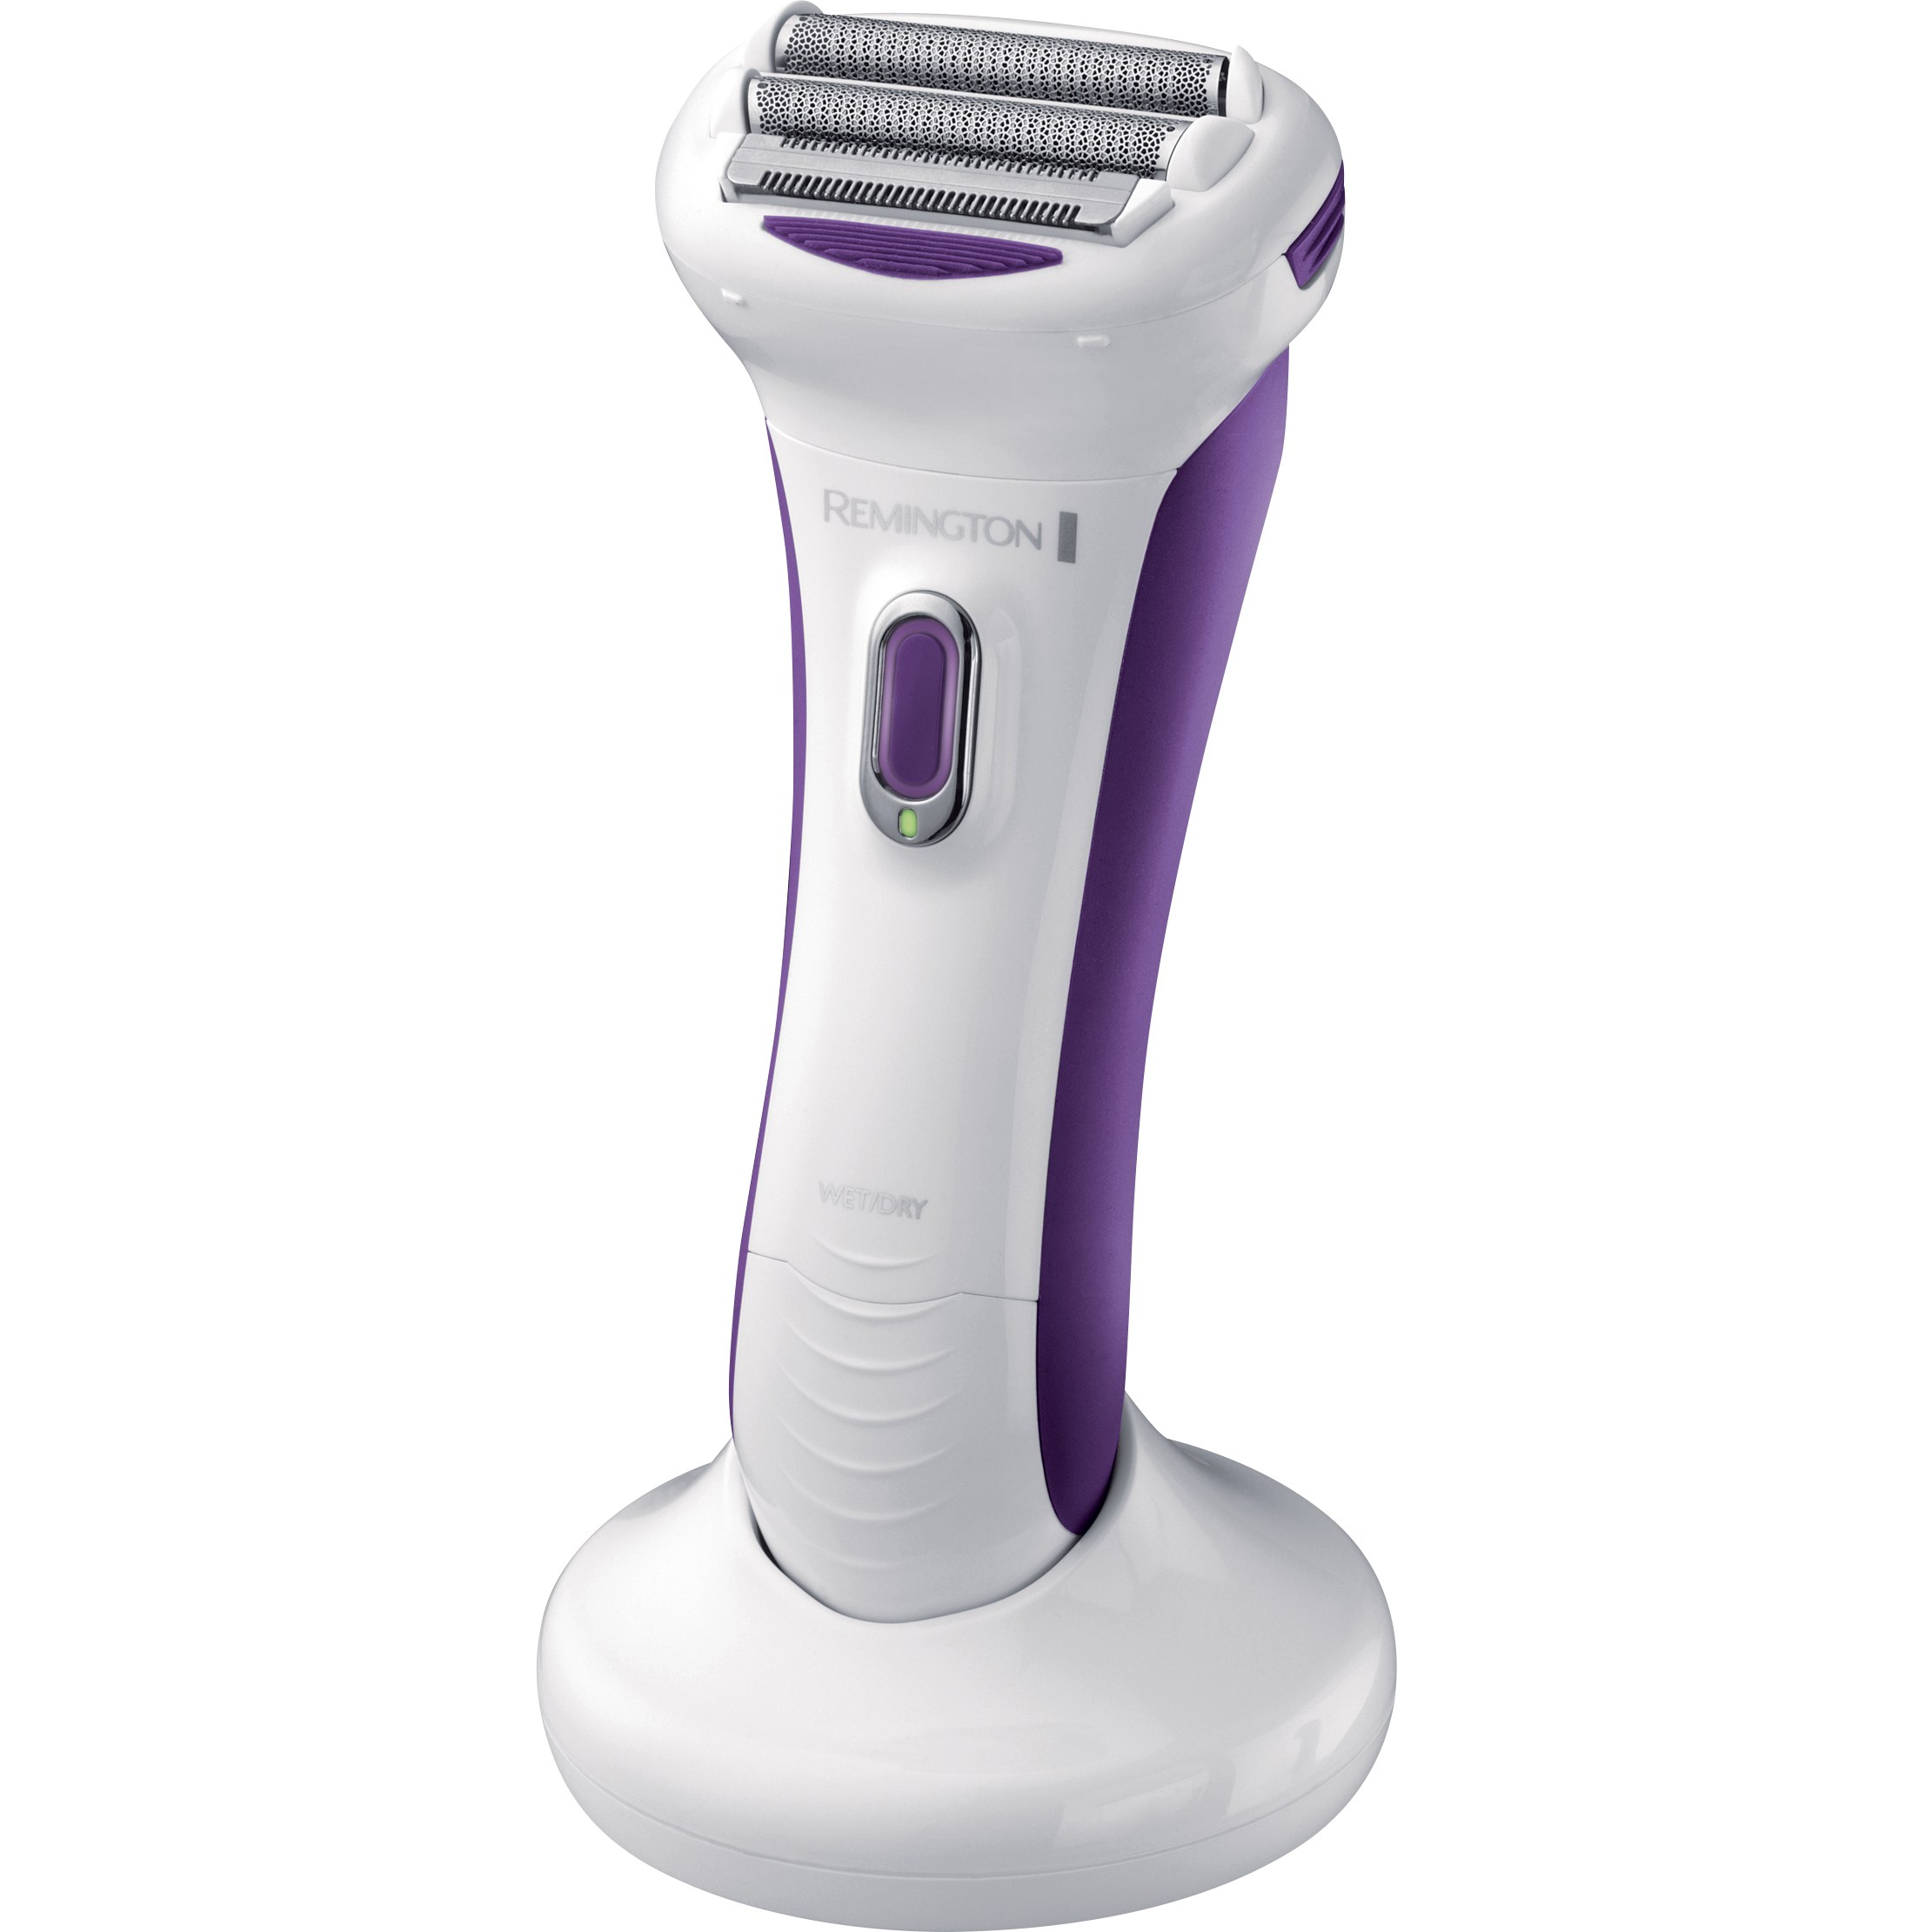 Läs mer om Remington Smooth & Silky Rechargeable Ladyshaver